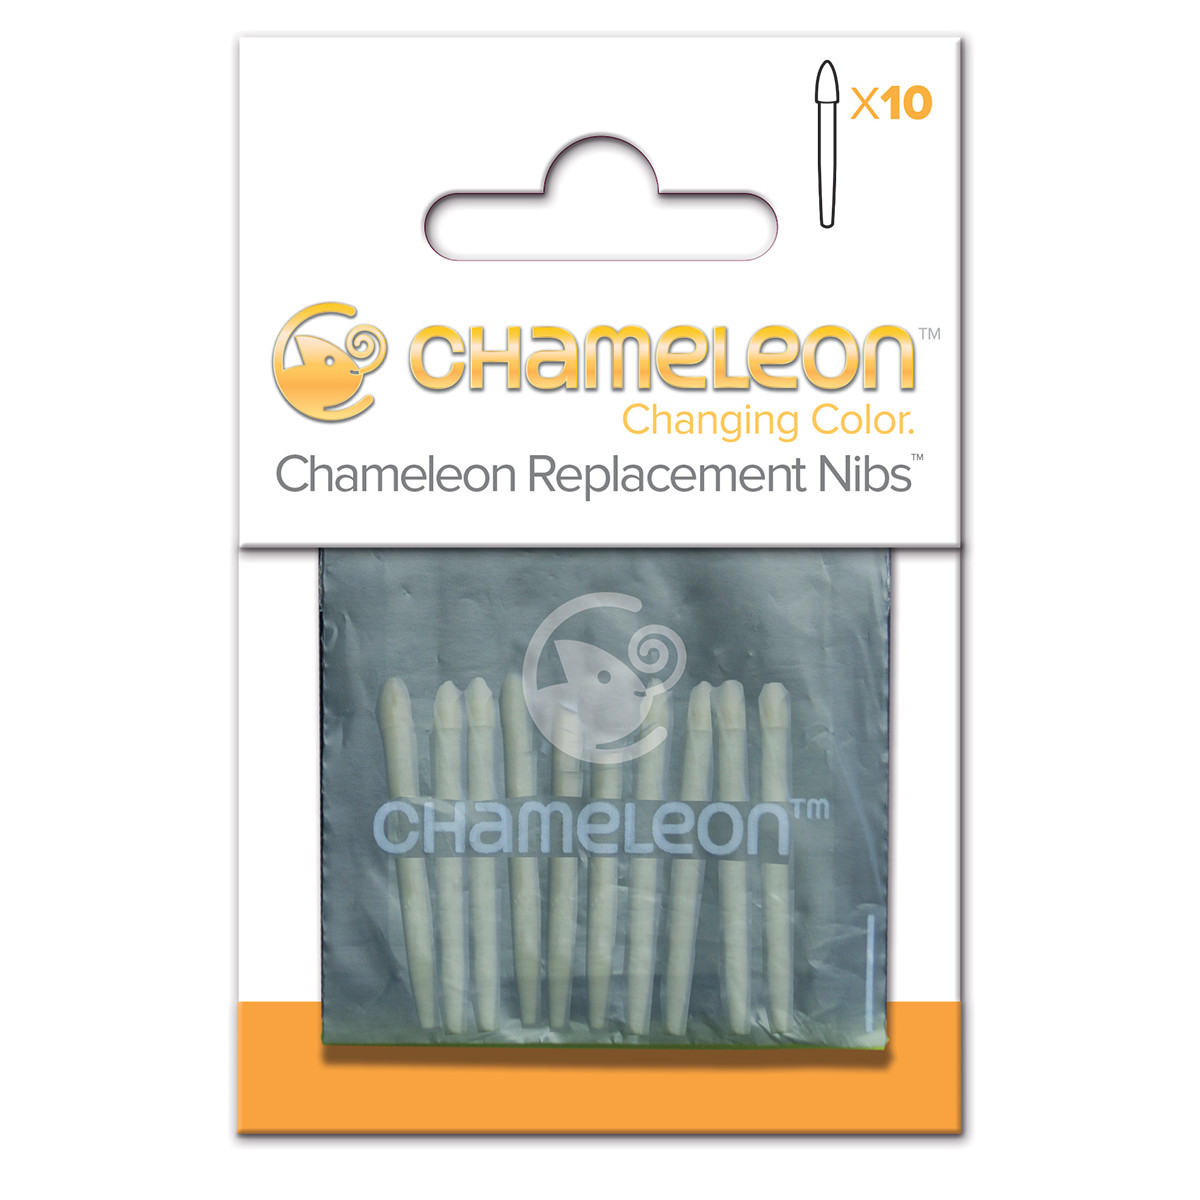 Chameleon Replacement Nibs - Bullet Tip (Pack of 10)